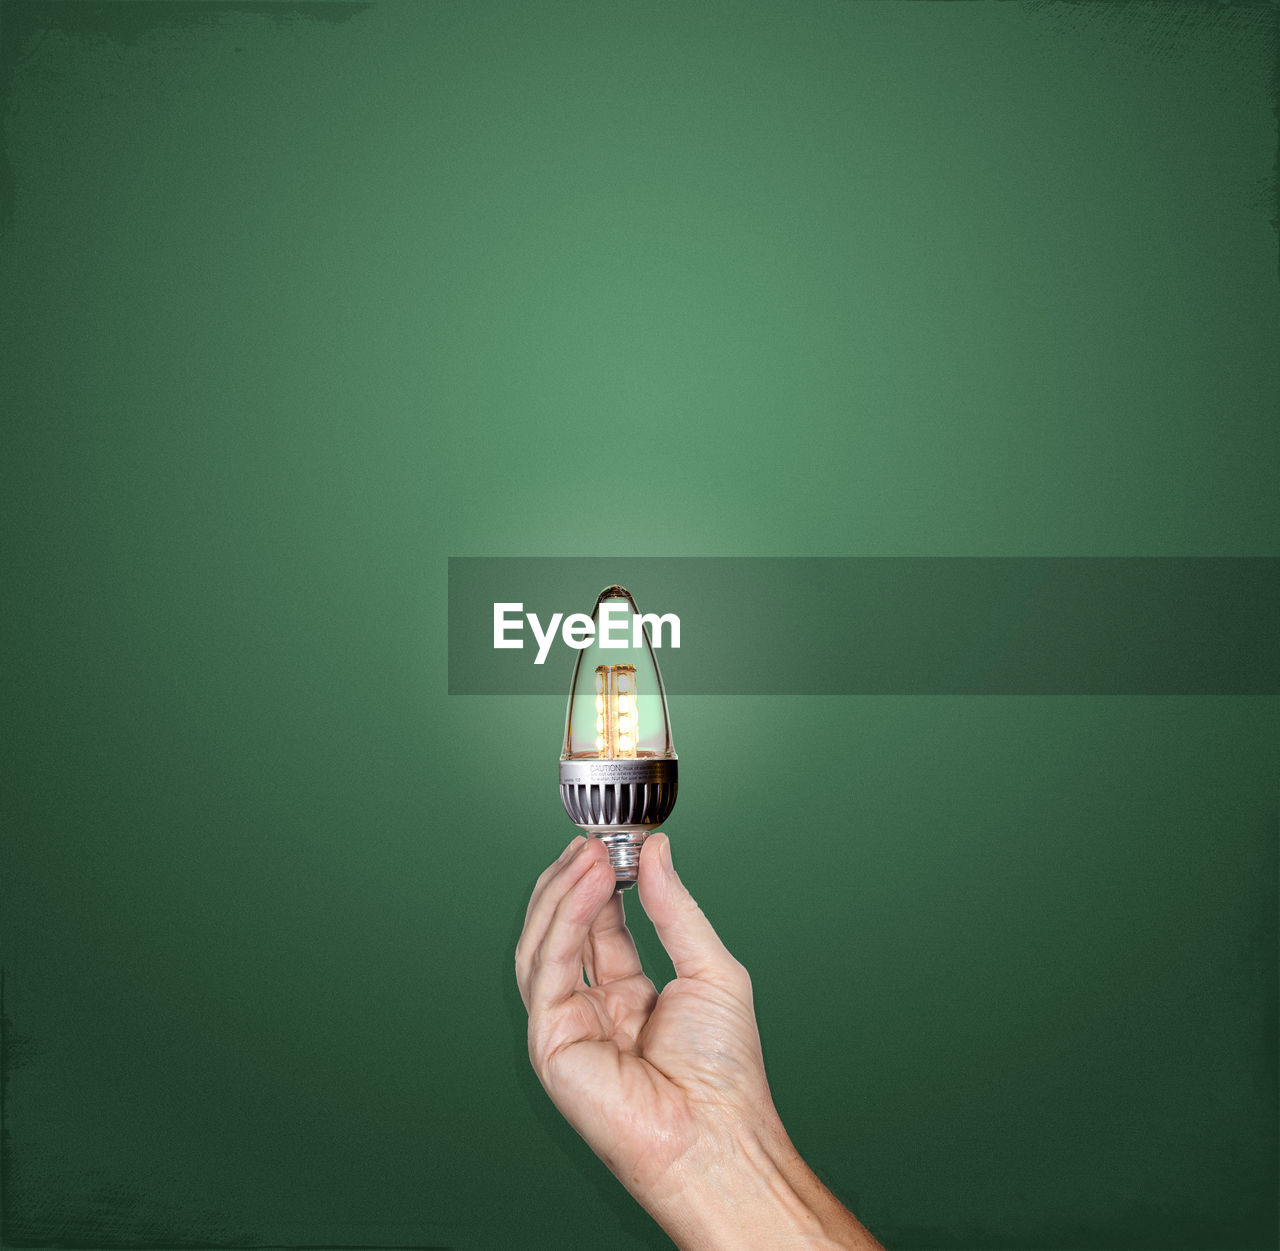 Cropped hand holding light bulb against green background